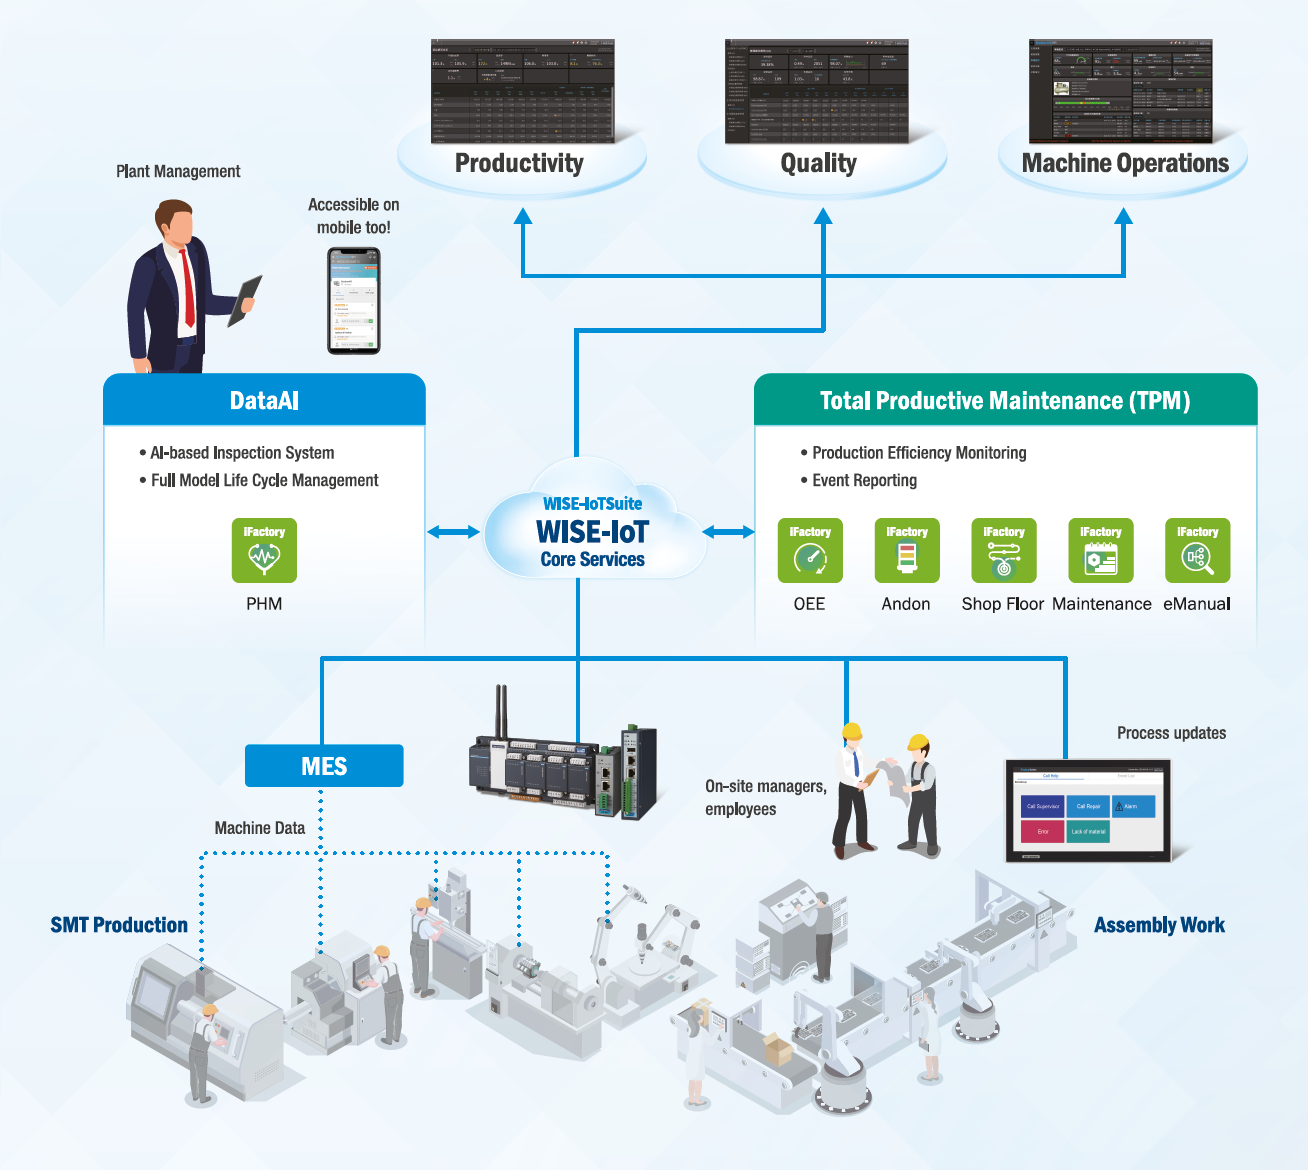 System Architectures of PCB industry management